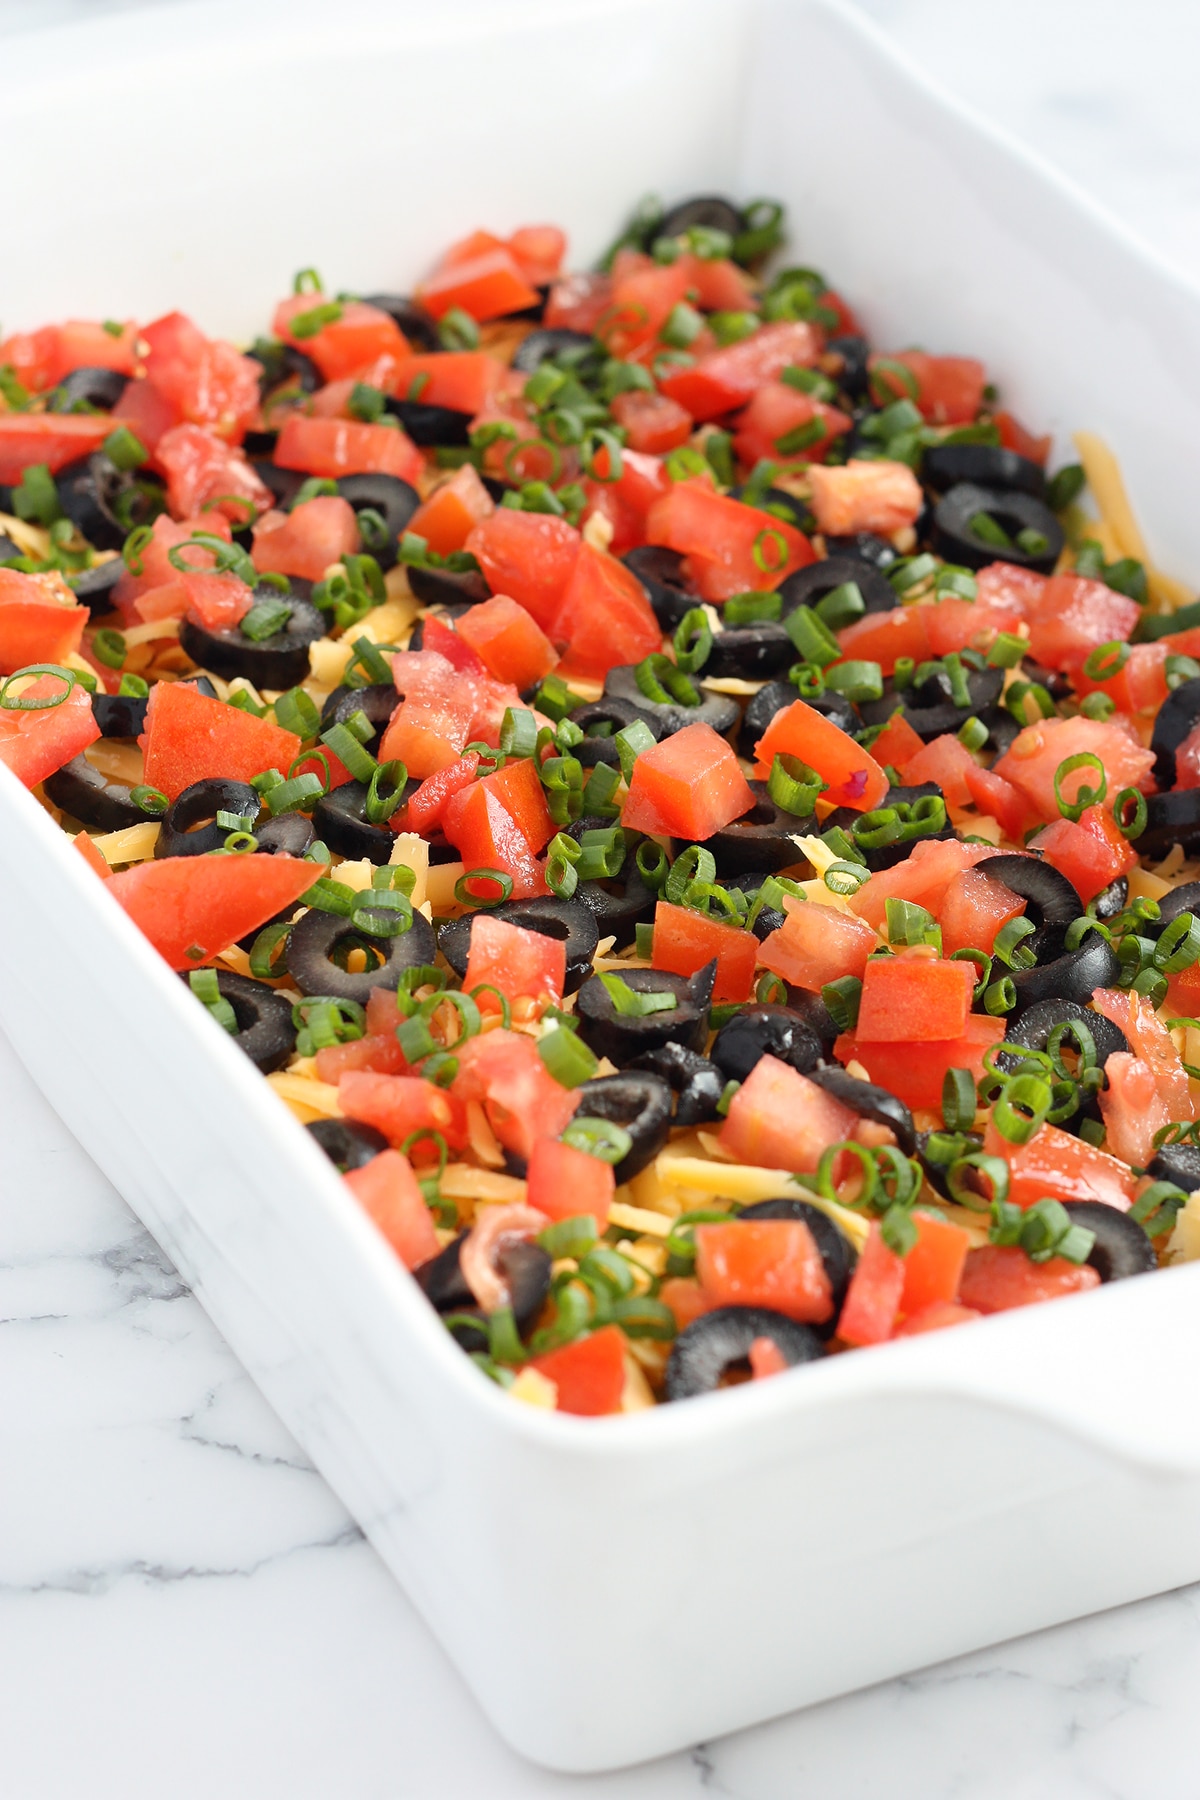 7-layer casserole of tomatoes, olives and leeks